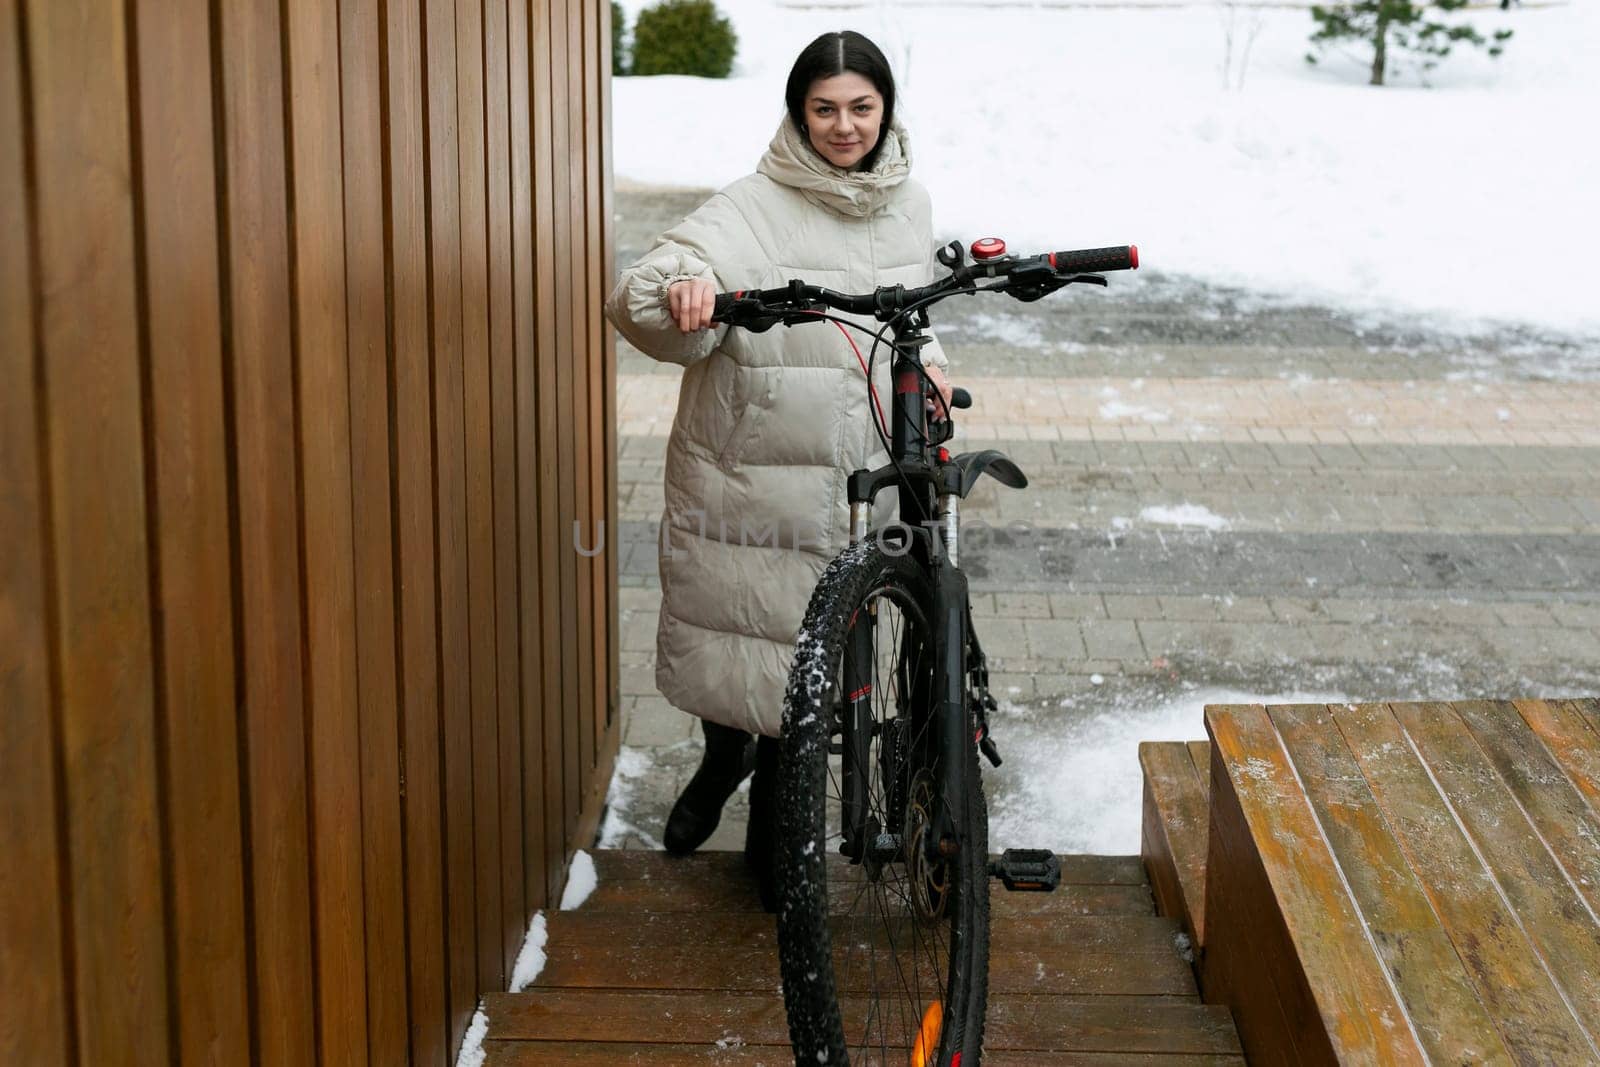 A woman is standing next to a bicycle in a snowy landscape. She appears to be dressed warmly for the cold weather, with snow covering the ground around her.